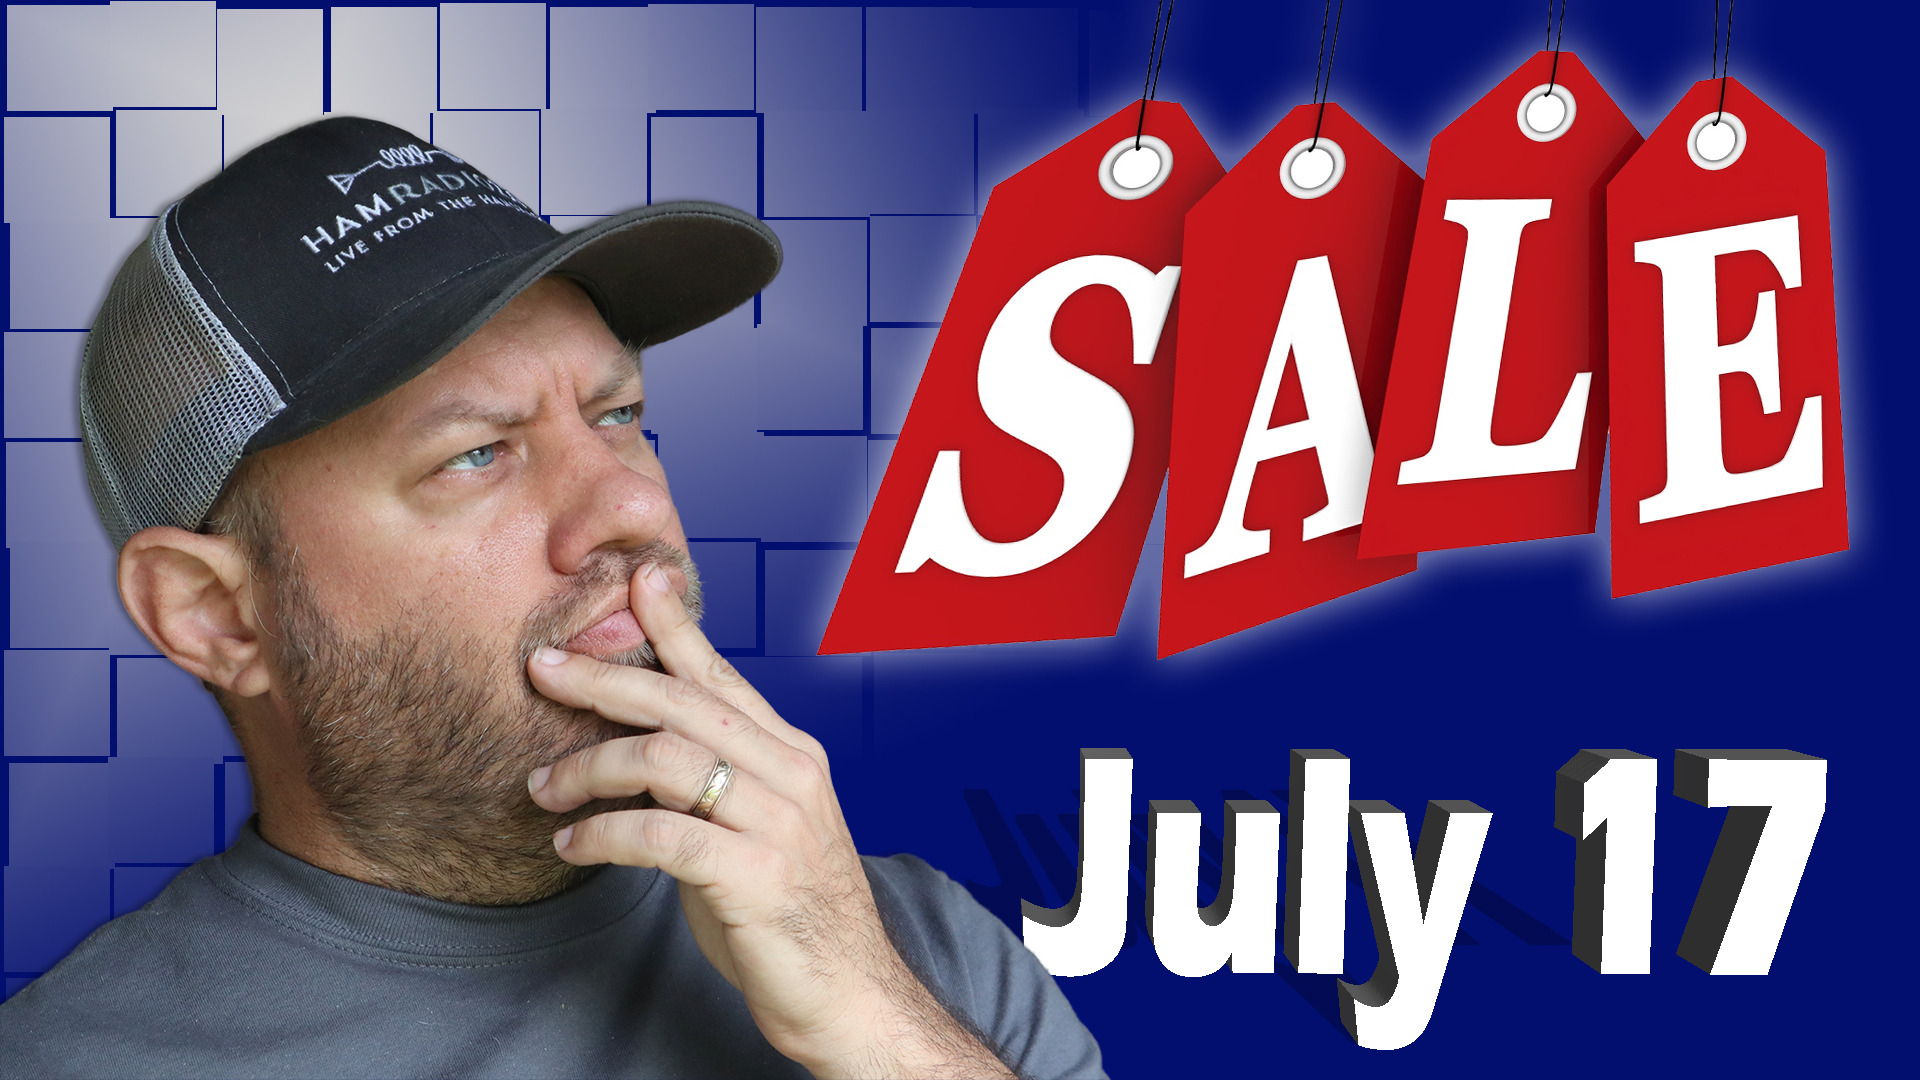 Episode 417: Ham Radio Shopping Deals for Friday, July 17